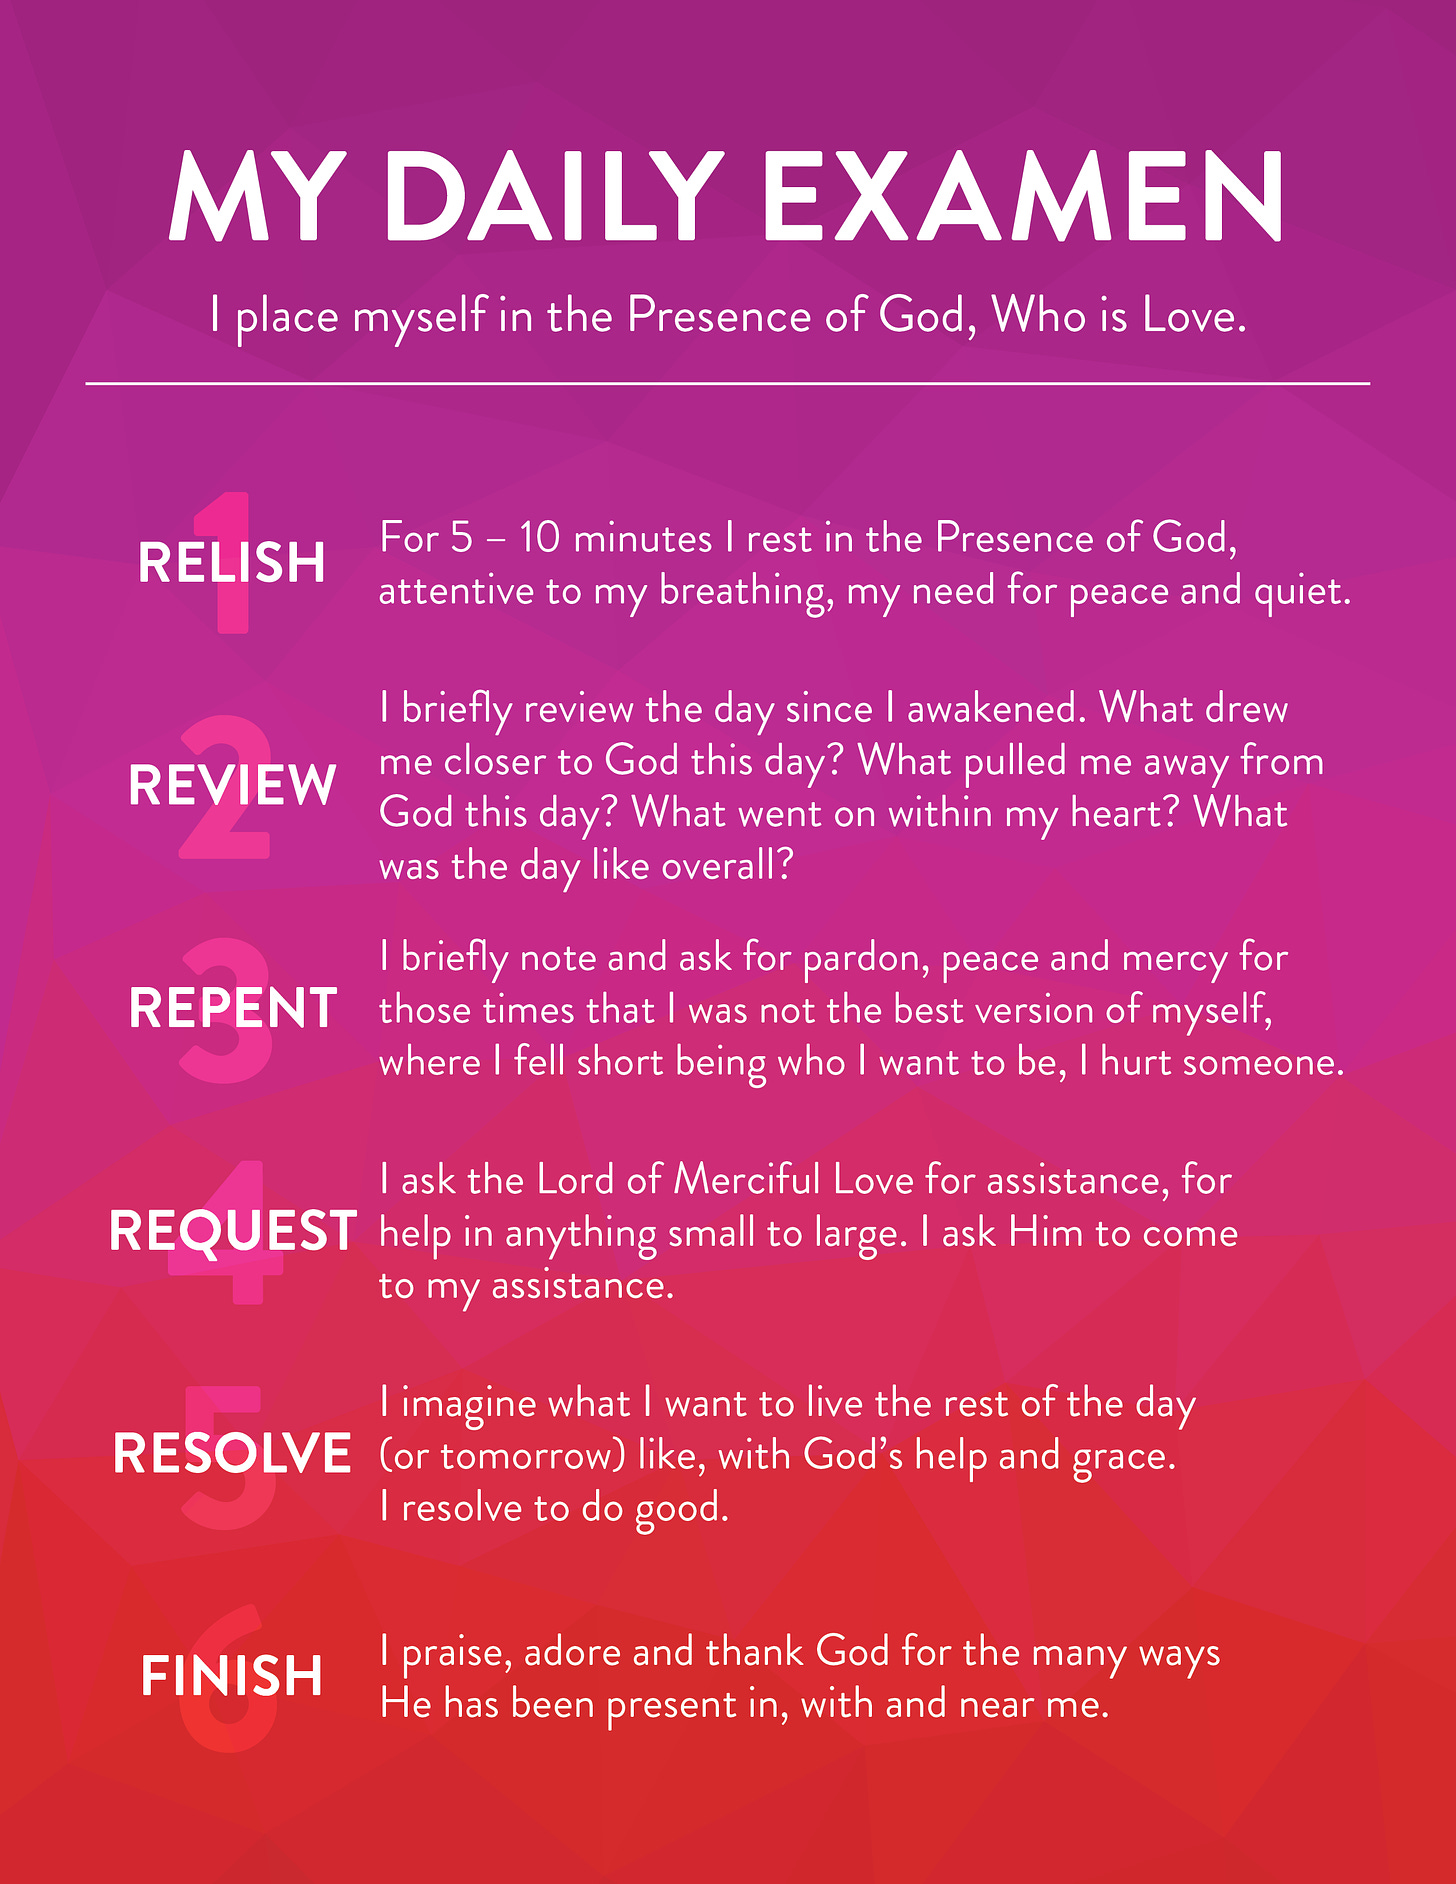 Six daily steps to help you re-center yourself in God [Infographic]